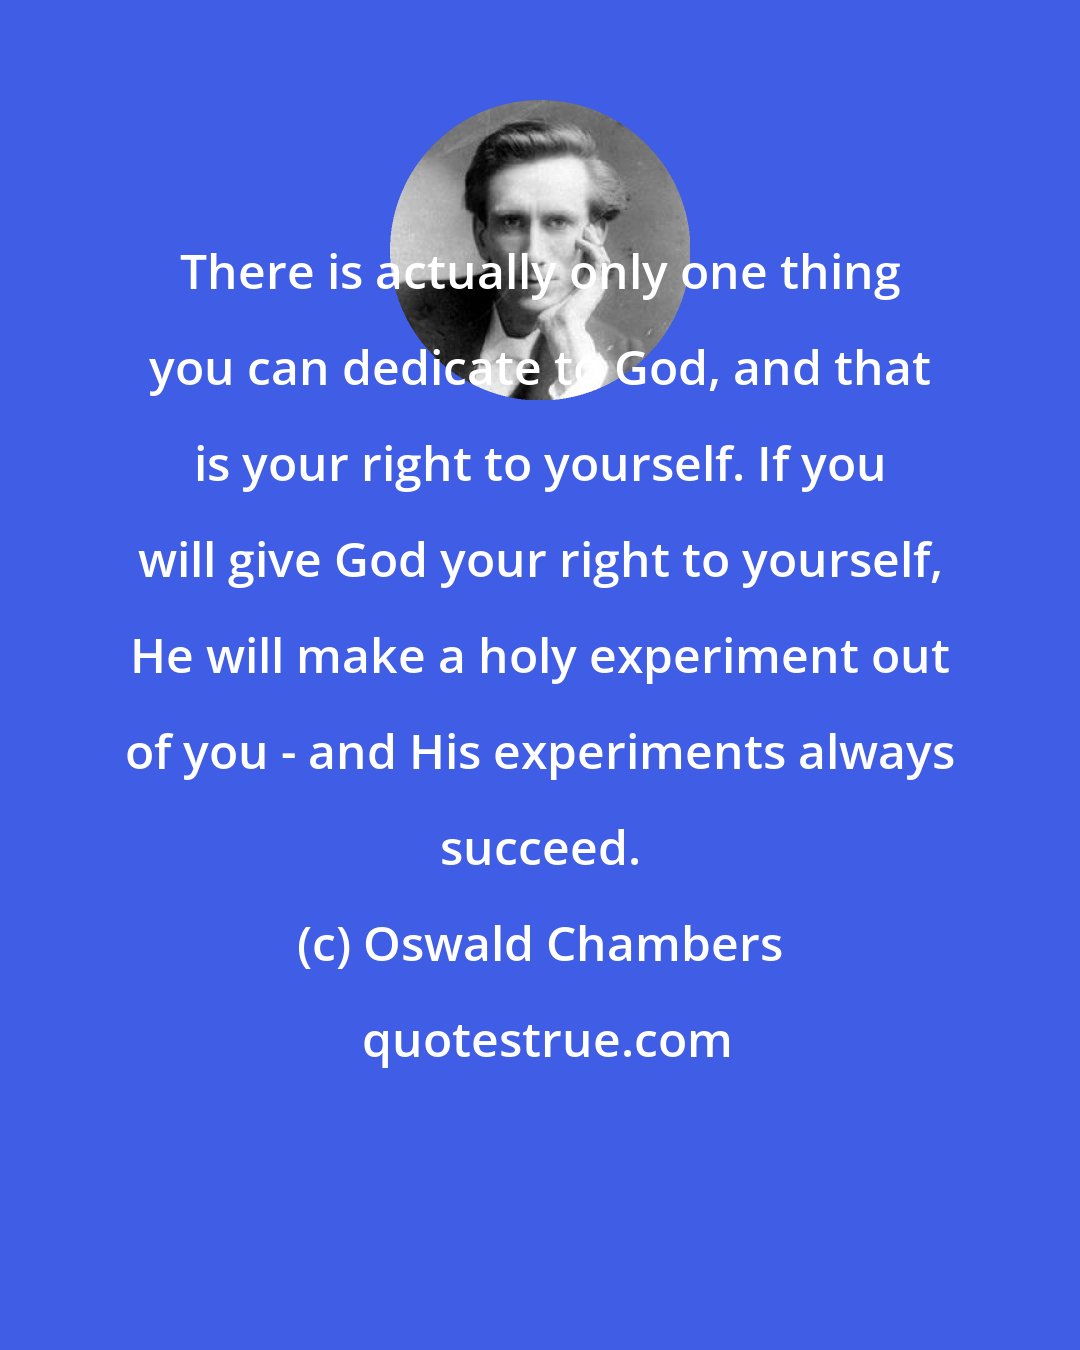 Oswald Chambers: There is actually only one thing you can dedicate to God, and that is your right to yourself. If you will give God your right to yourself, He will make a holy experiment out of you - and His experiments always succeed.